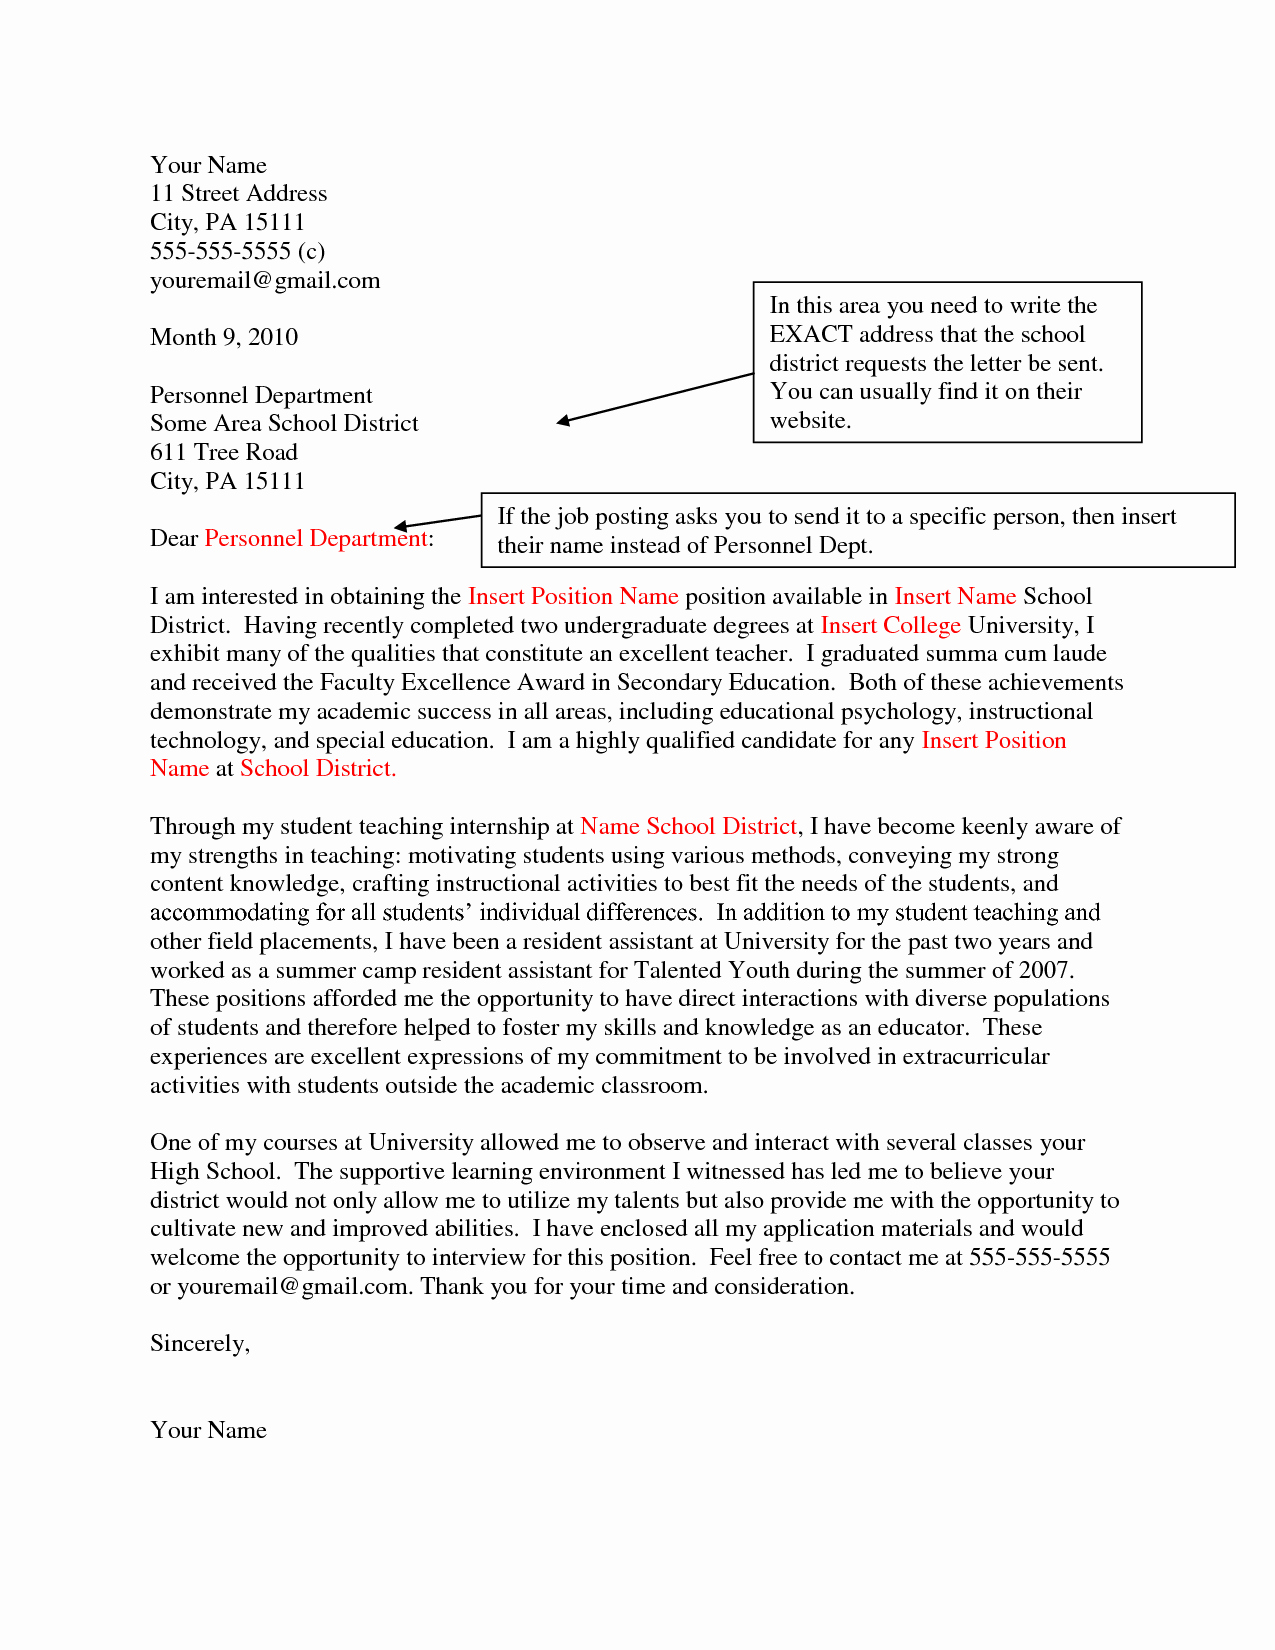 Letters Of Interest Examples Lovely How to Write A Cover Letter Of Interest Example for A Job